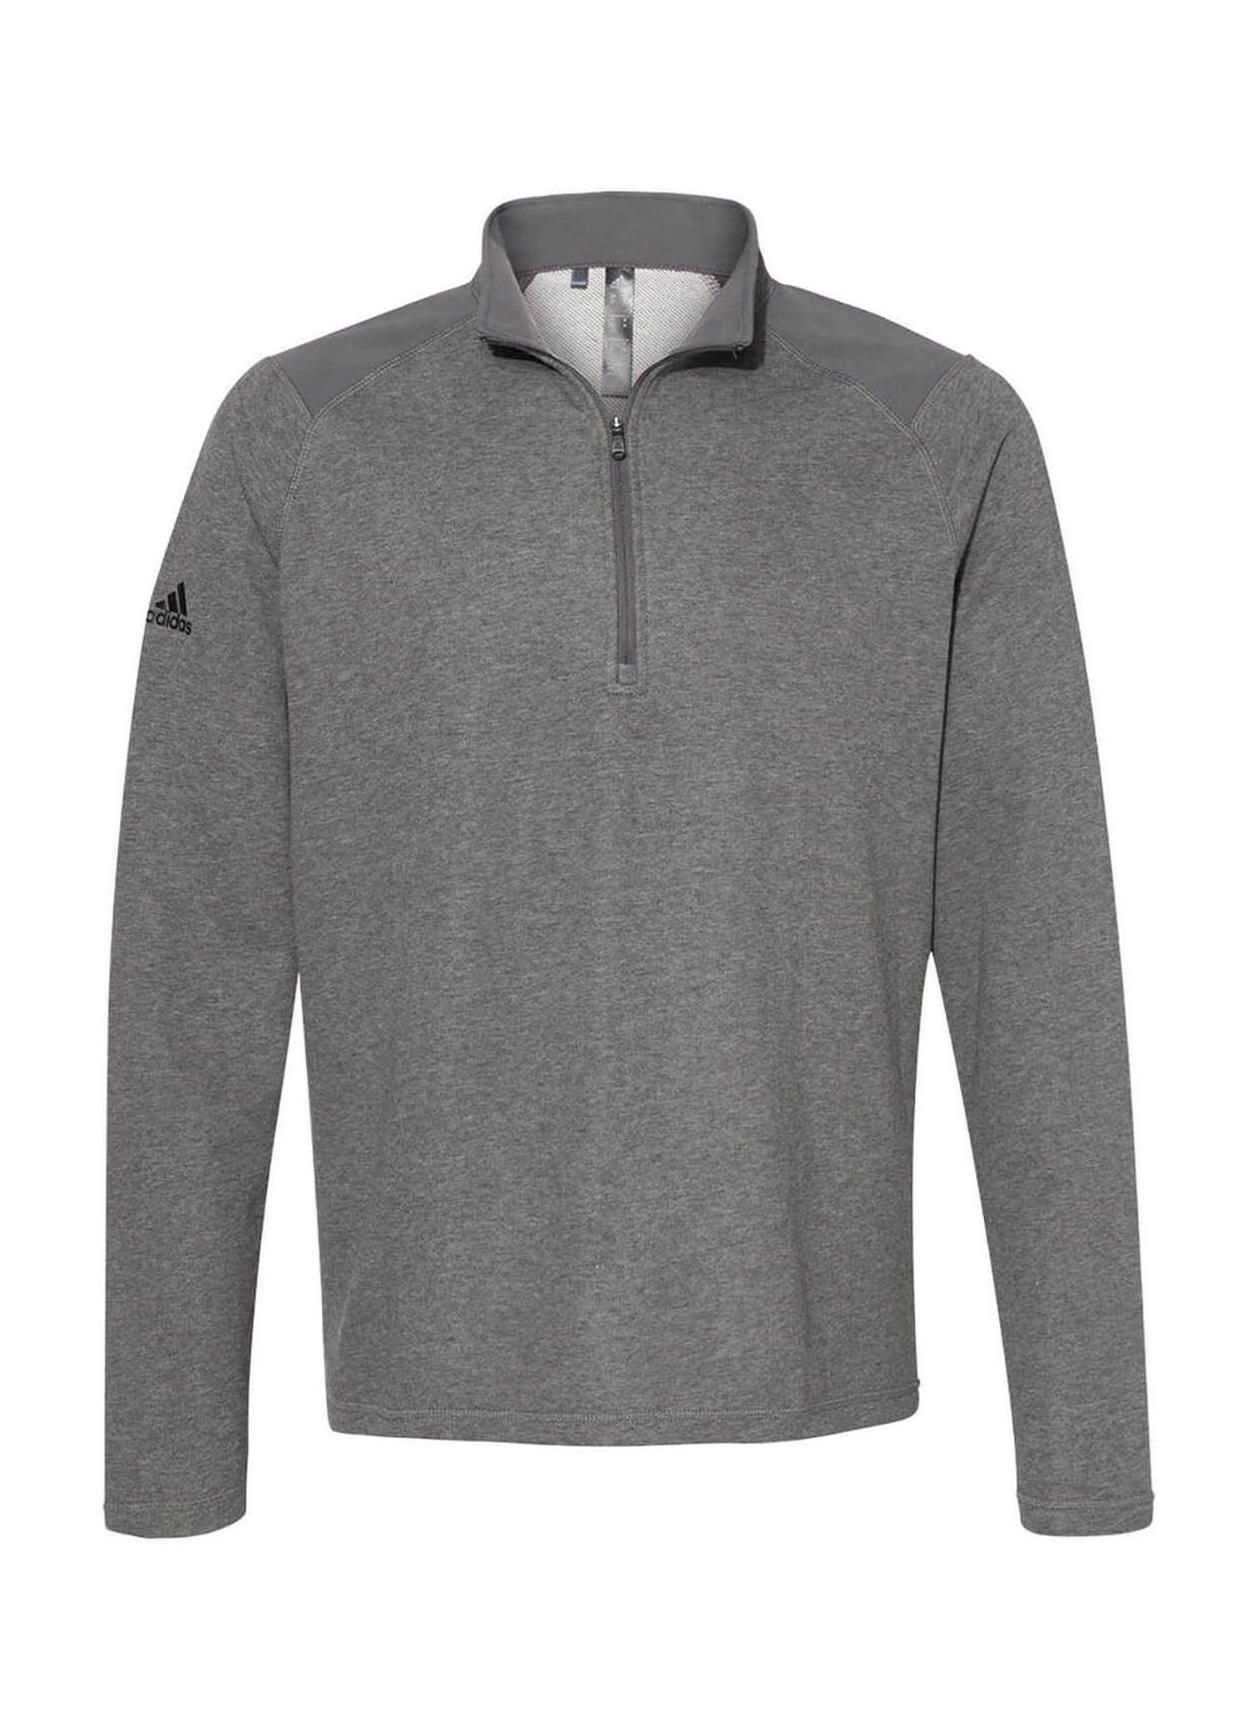 Men's Adidas Grey Five Heather Heathered Quarter-Zip Pullover With Colorblocked Shoulders